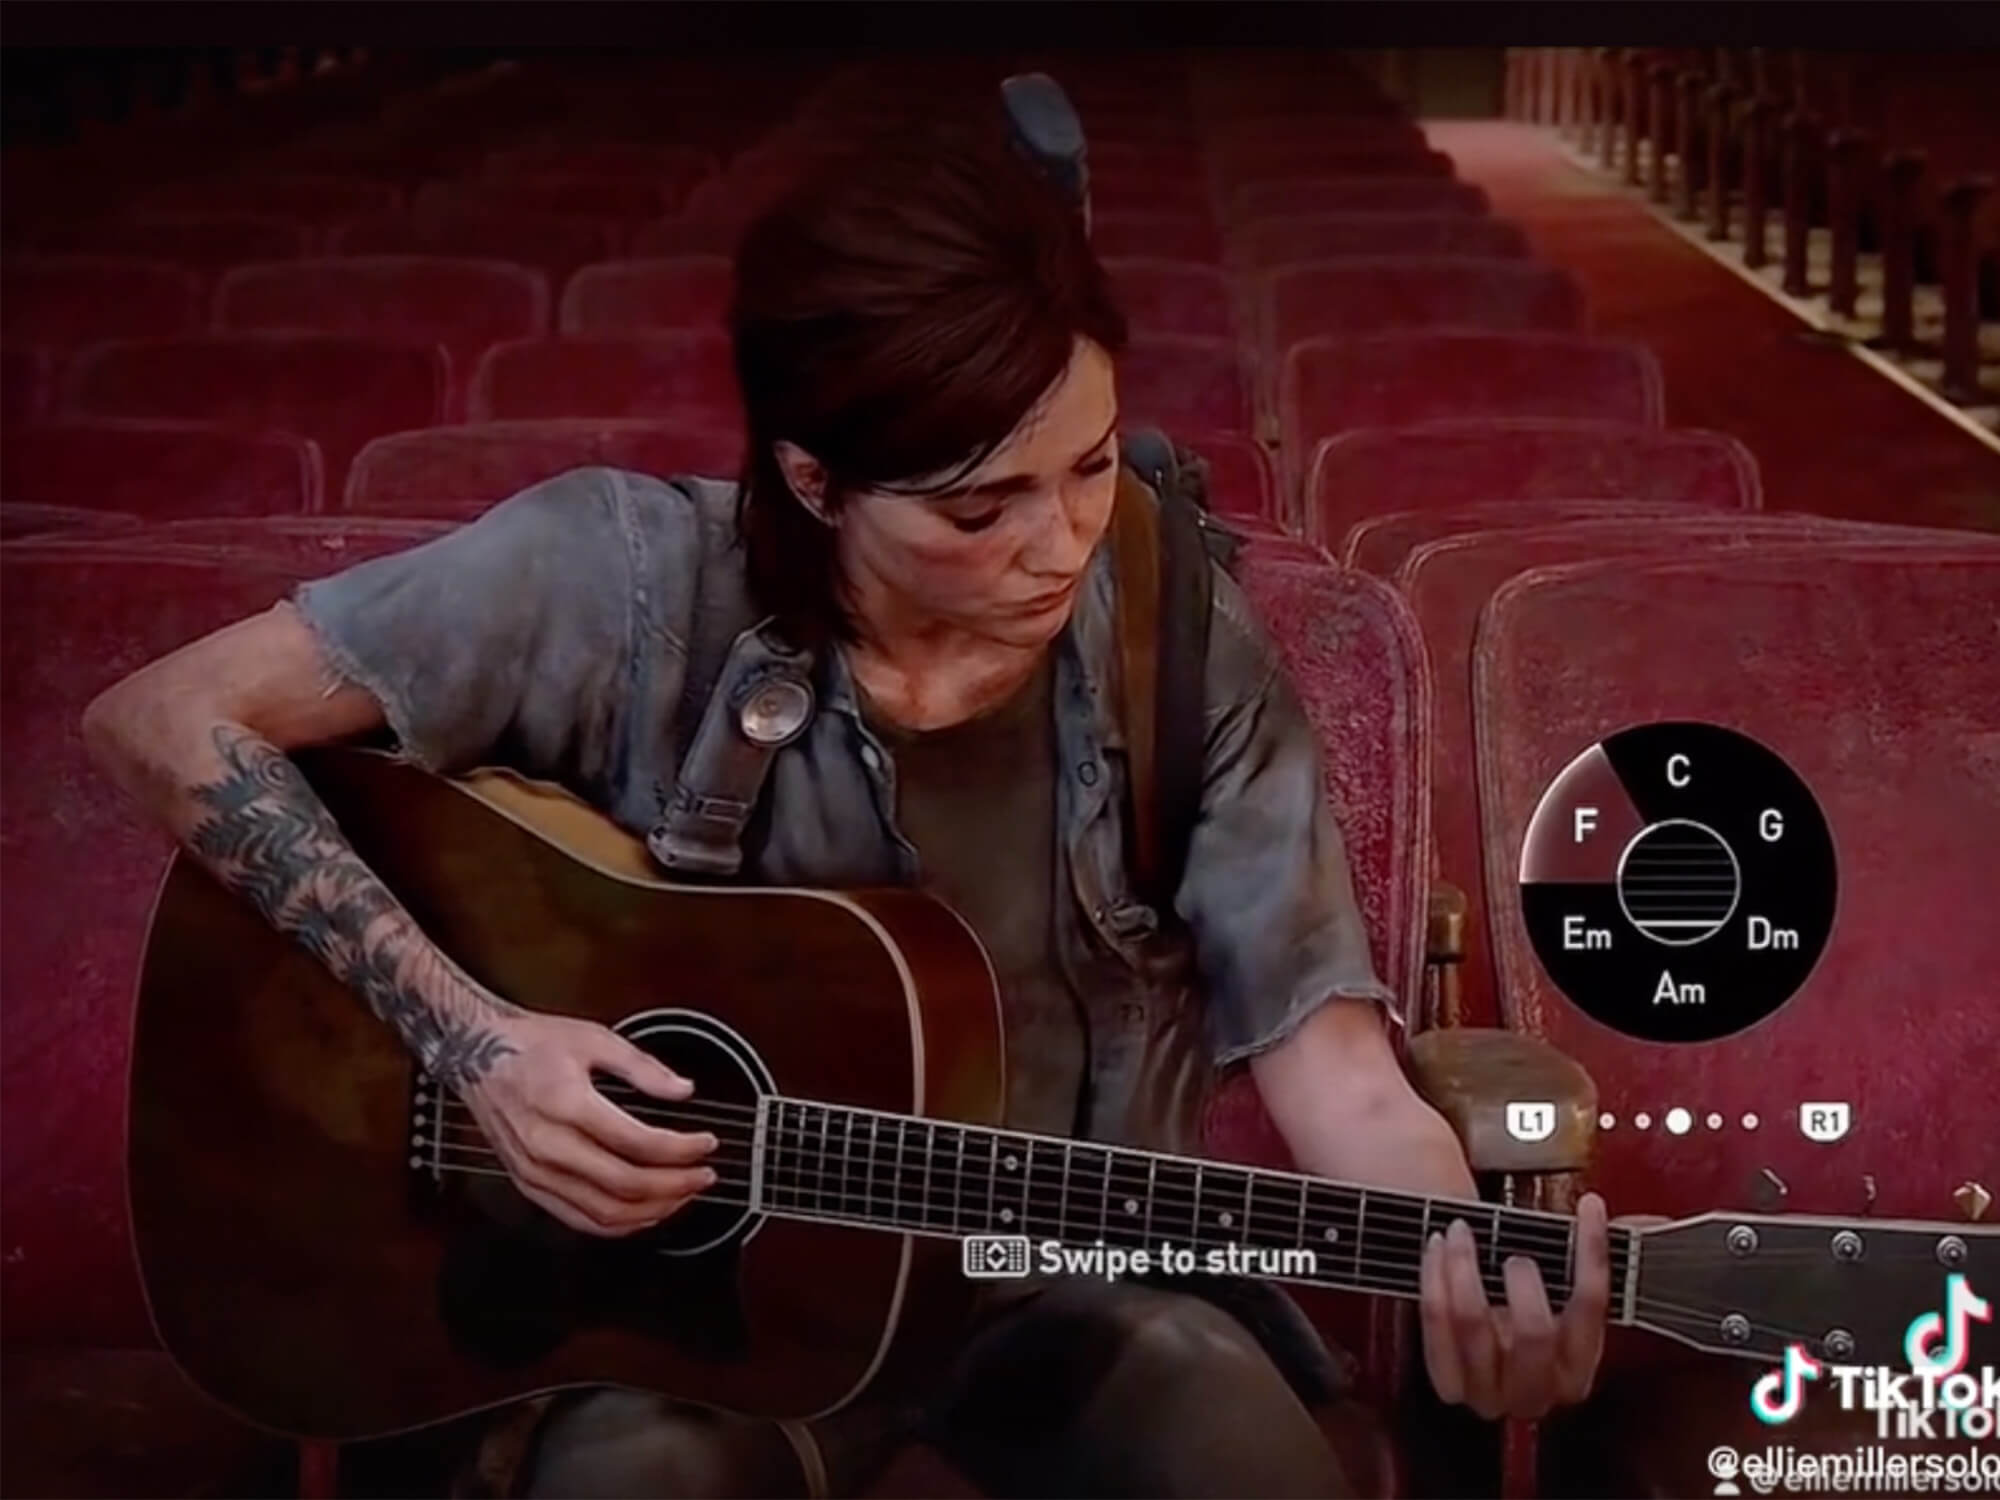 The Last Of Us' Ellie playing guitar